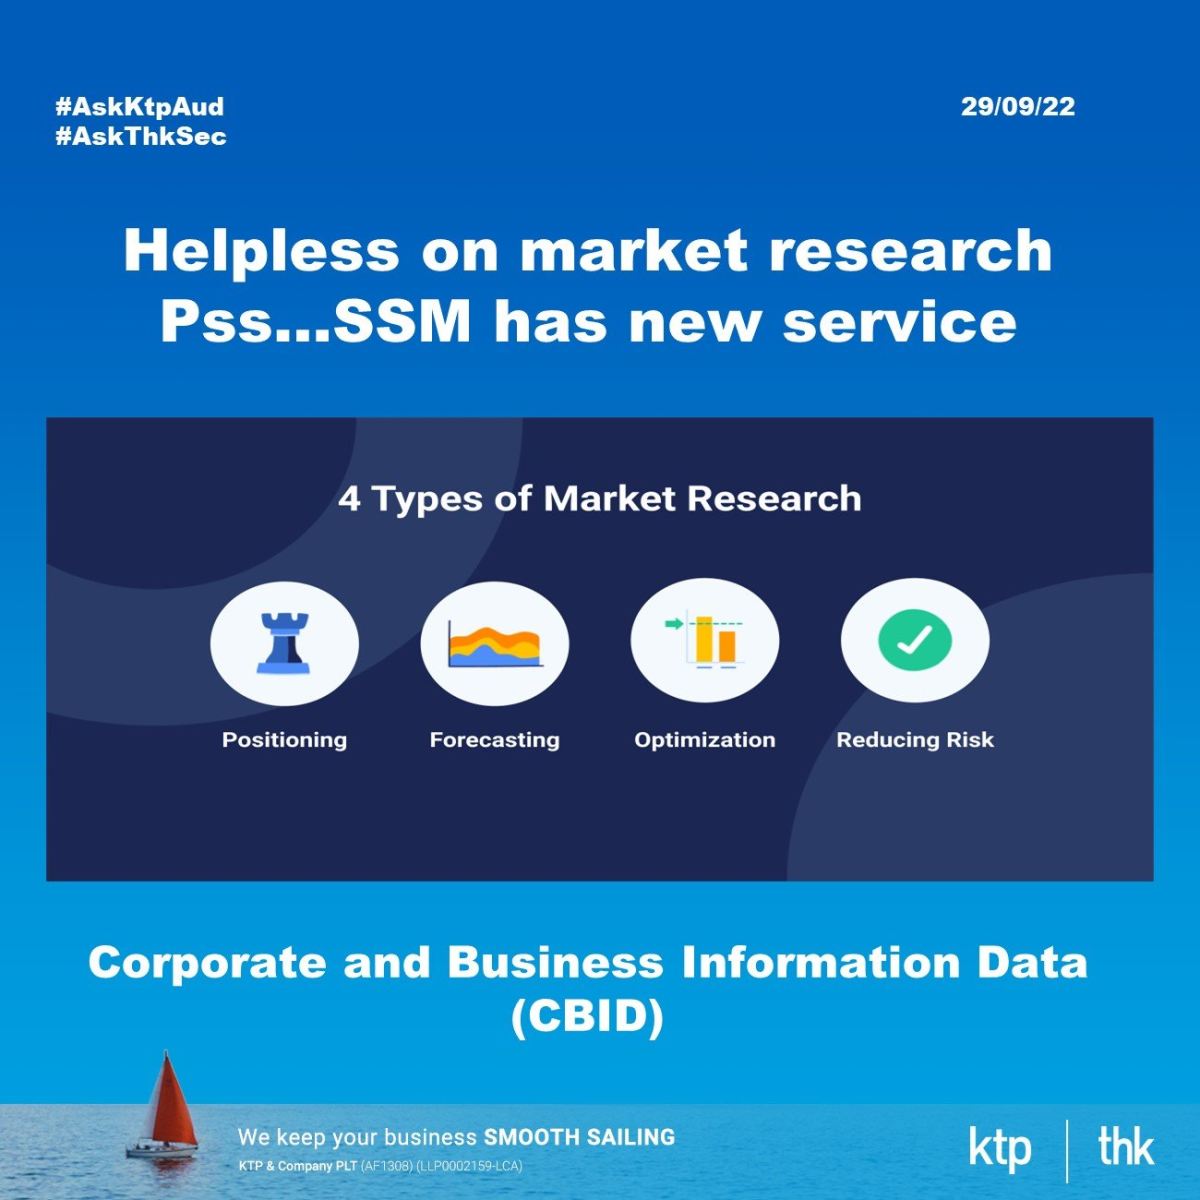 Corporate and Business Information Data (CBID)